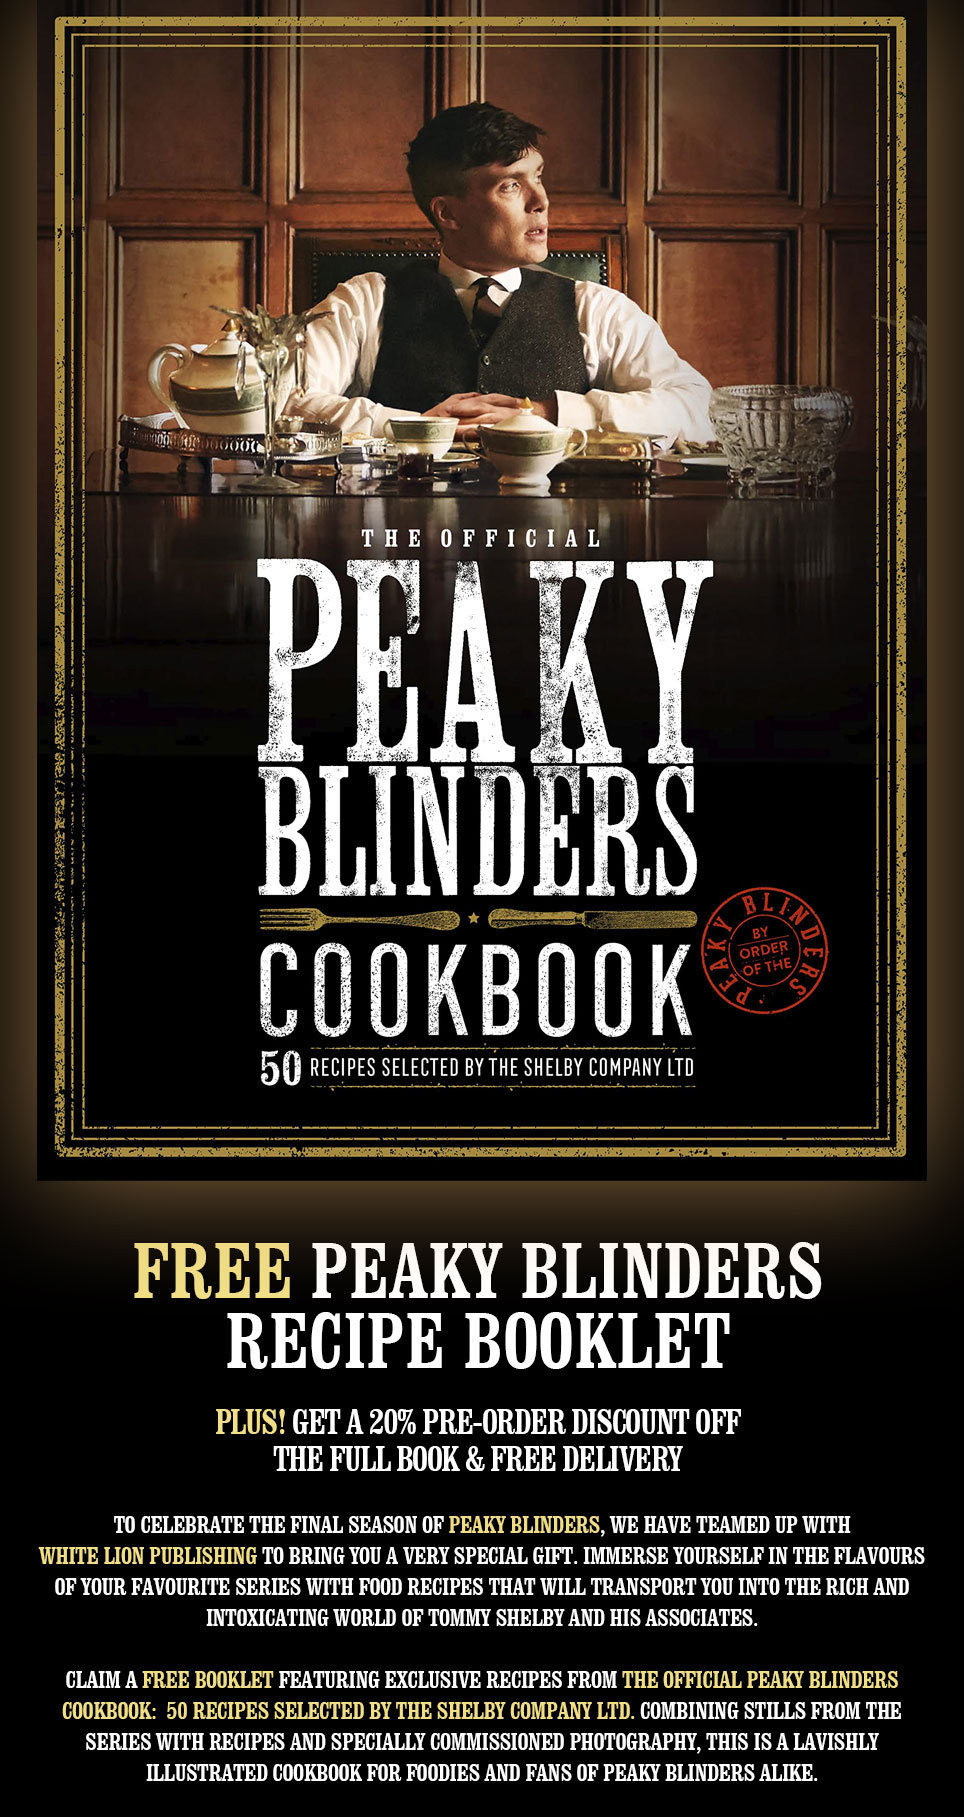 To get you ready for the festive season, we have teamed with The Quarto Group to bring you a special gift. Immerse yourself in the atmosphere of your favourite series by making delicious cocktails inspired by the world of Peaky Blinders! Claim a free booklet featuring exclusive recipes from Peaky Blinders Cocktail Book: 40 Cocktails Selected by The Shelby Company Ltd. Featuring photography of the cast and settings from the award-winning BBC period crime drama Peaky Blinders, it’s the perfect gift this Christmas.